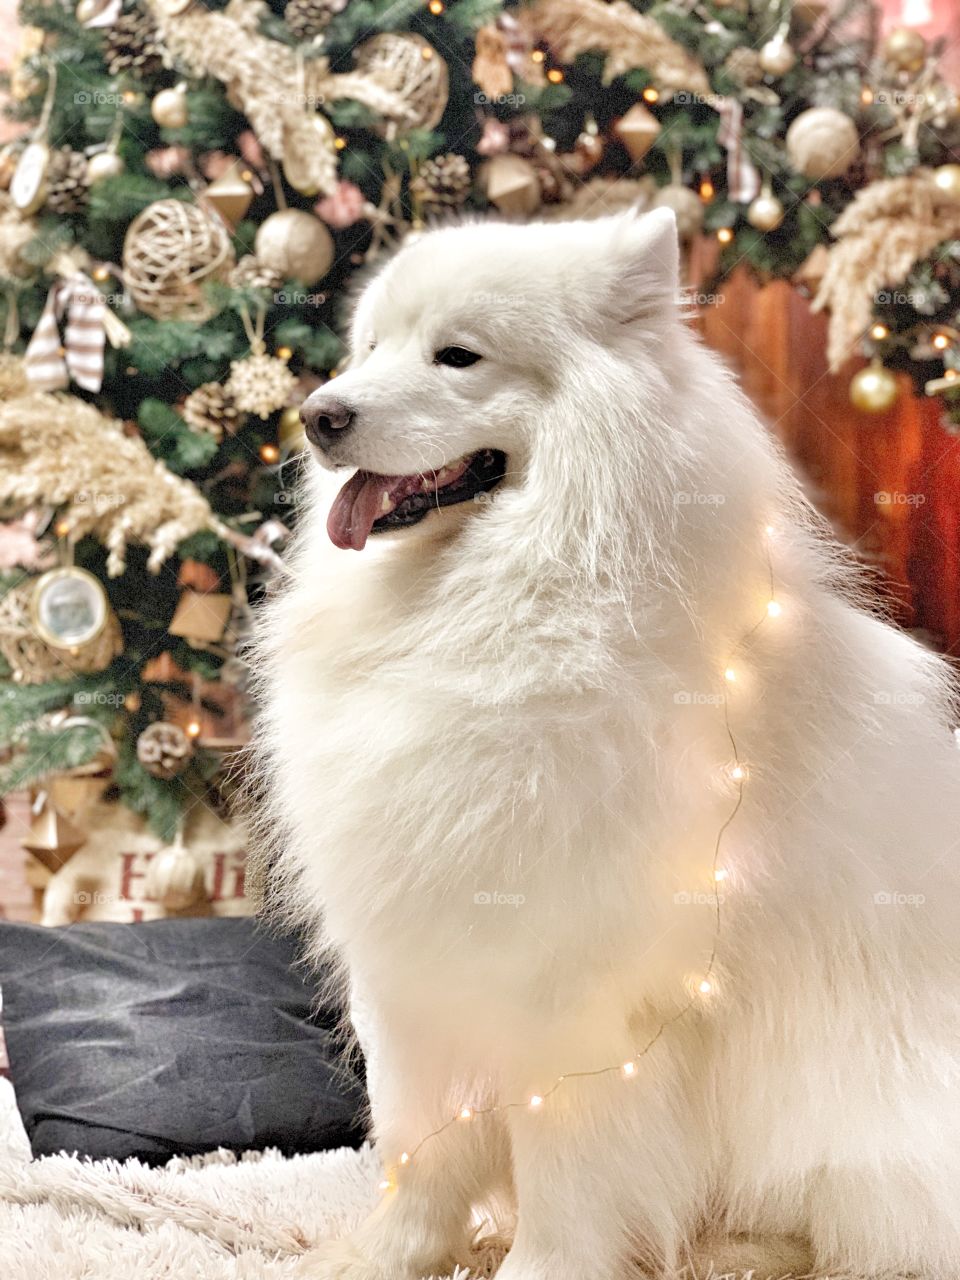 Samoyed was created by nature as a Christmas inspiration, that keeps you dreaming about holiday season during the whole year 